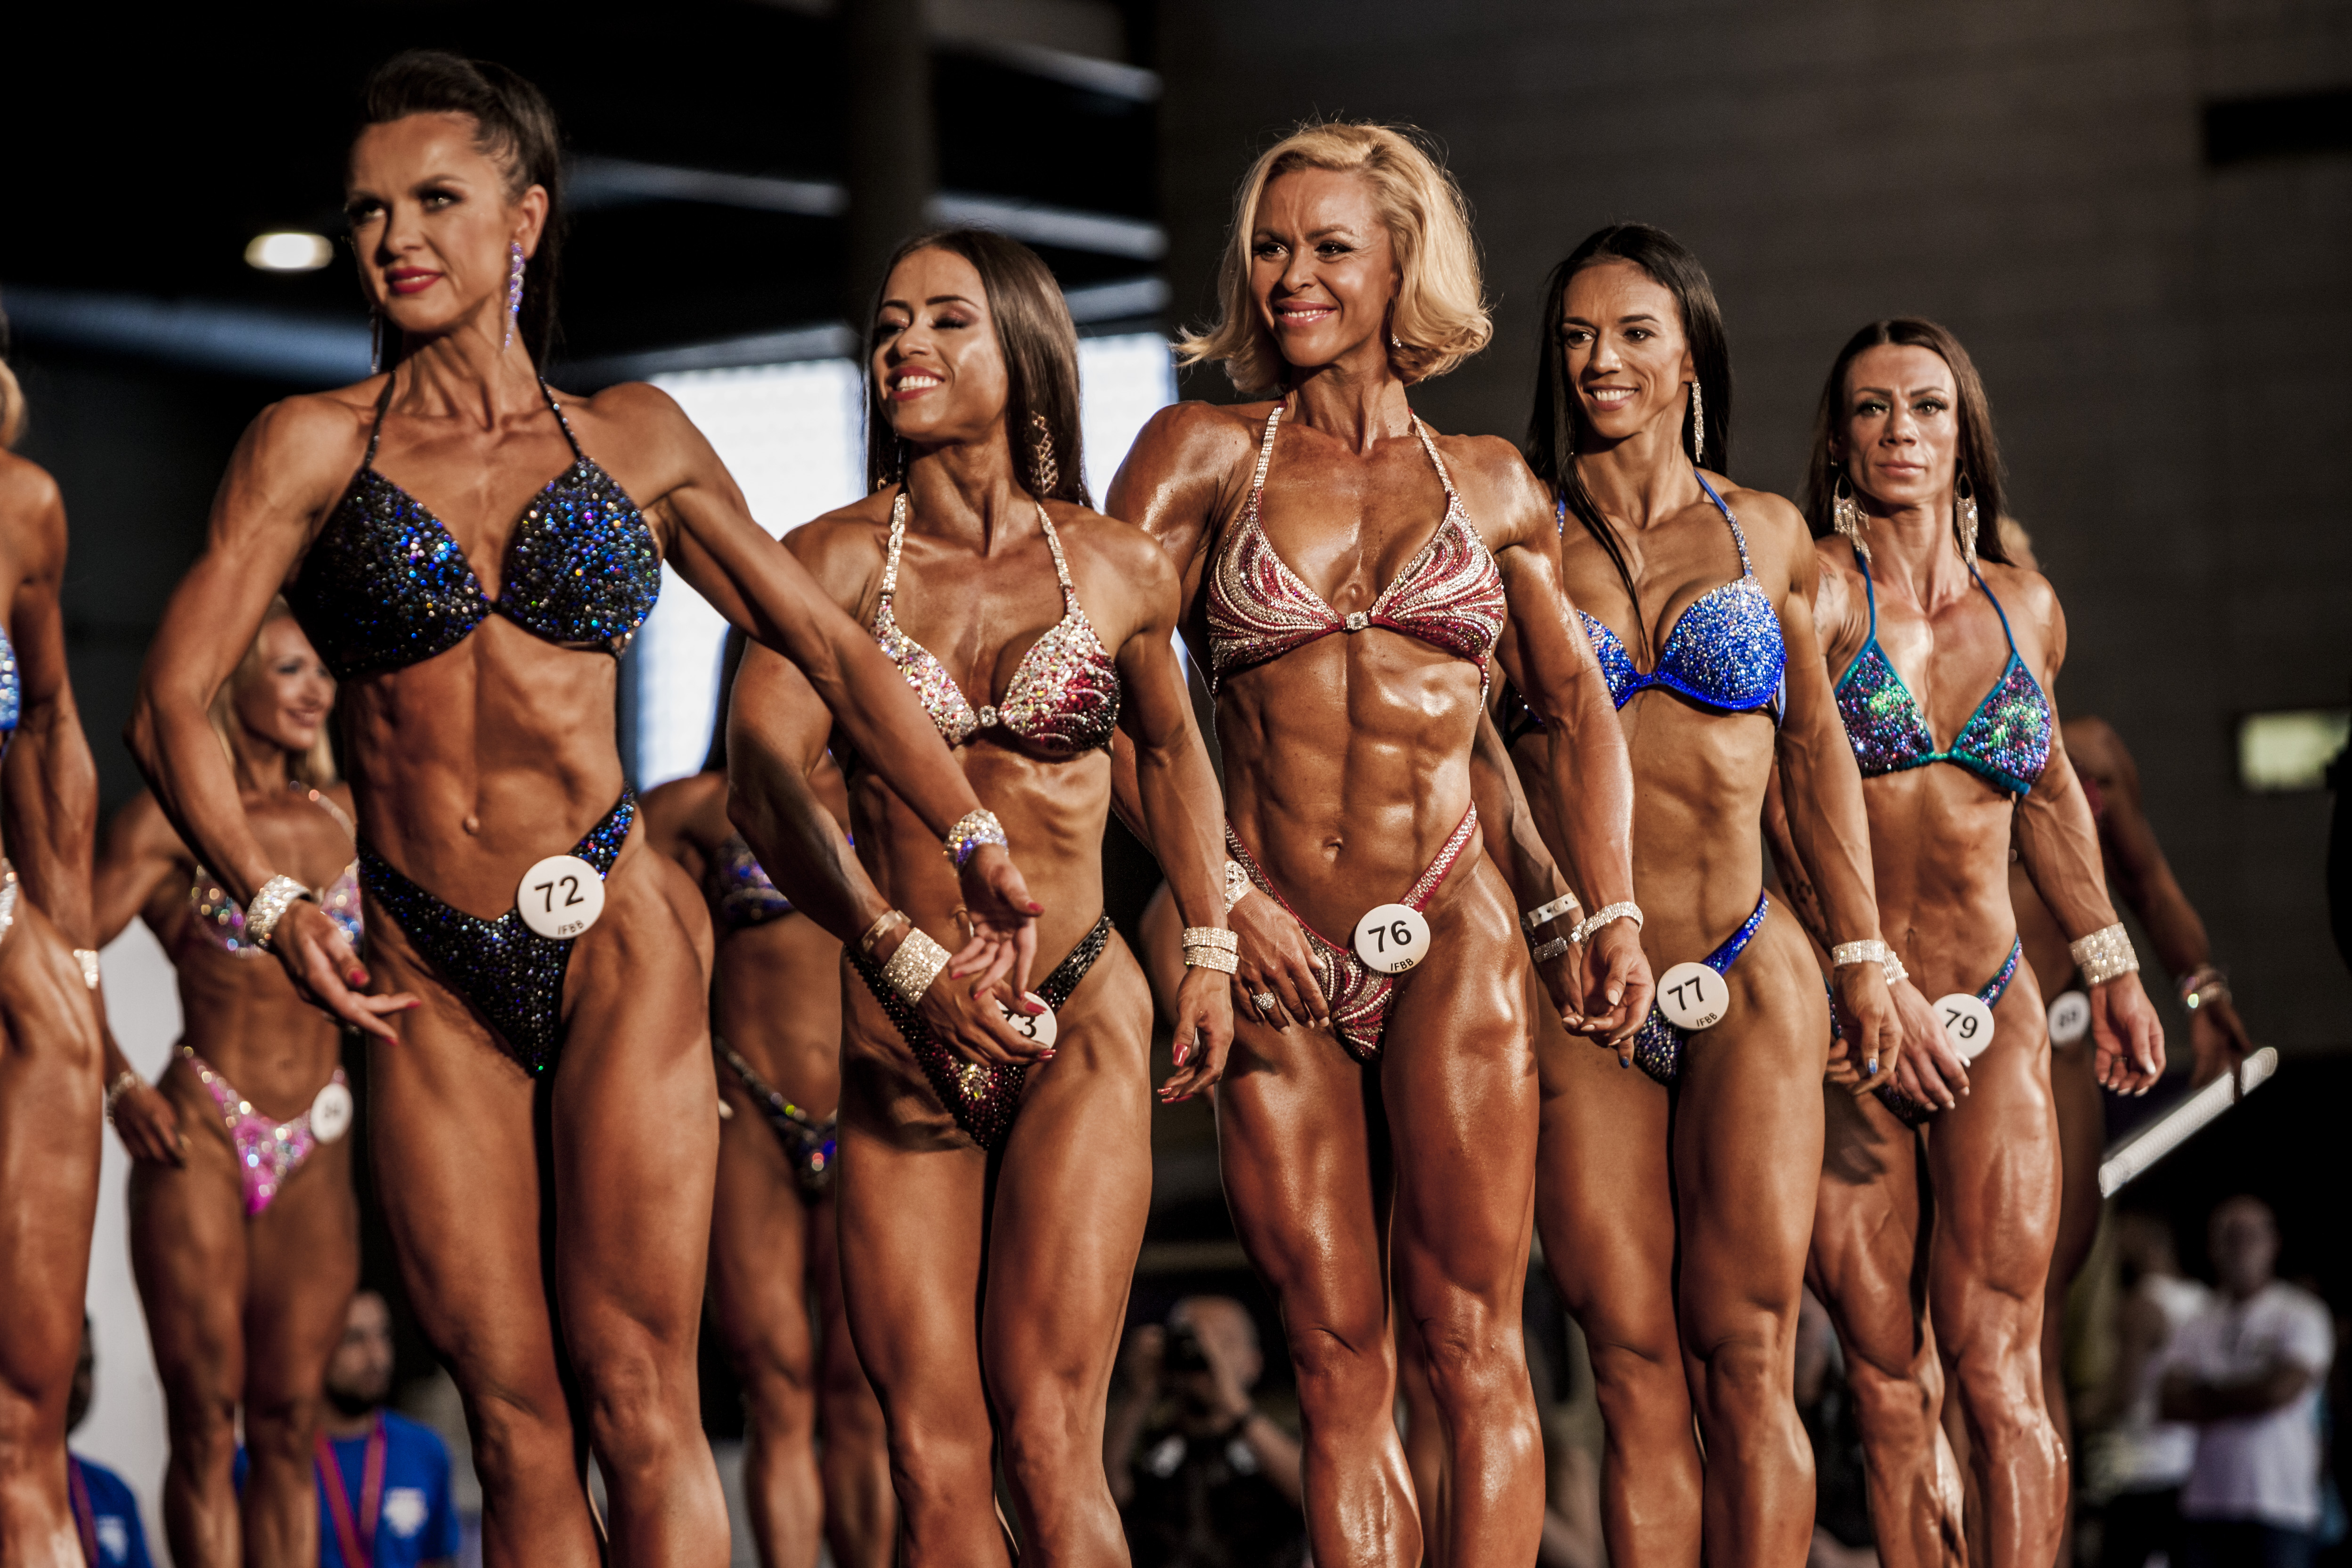 The Bodybuilding Wellness Division is All About the Lower Body photo